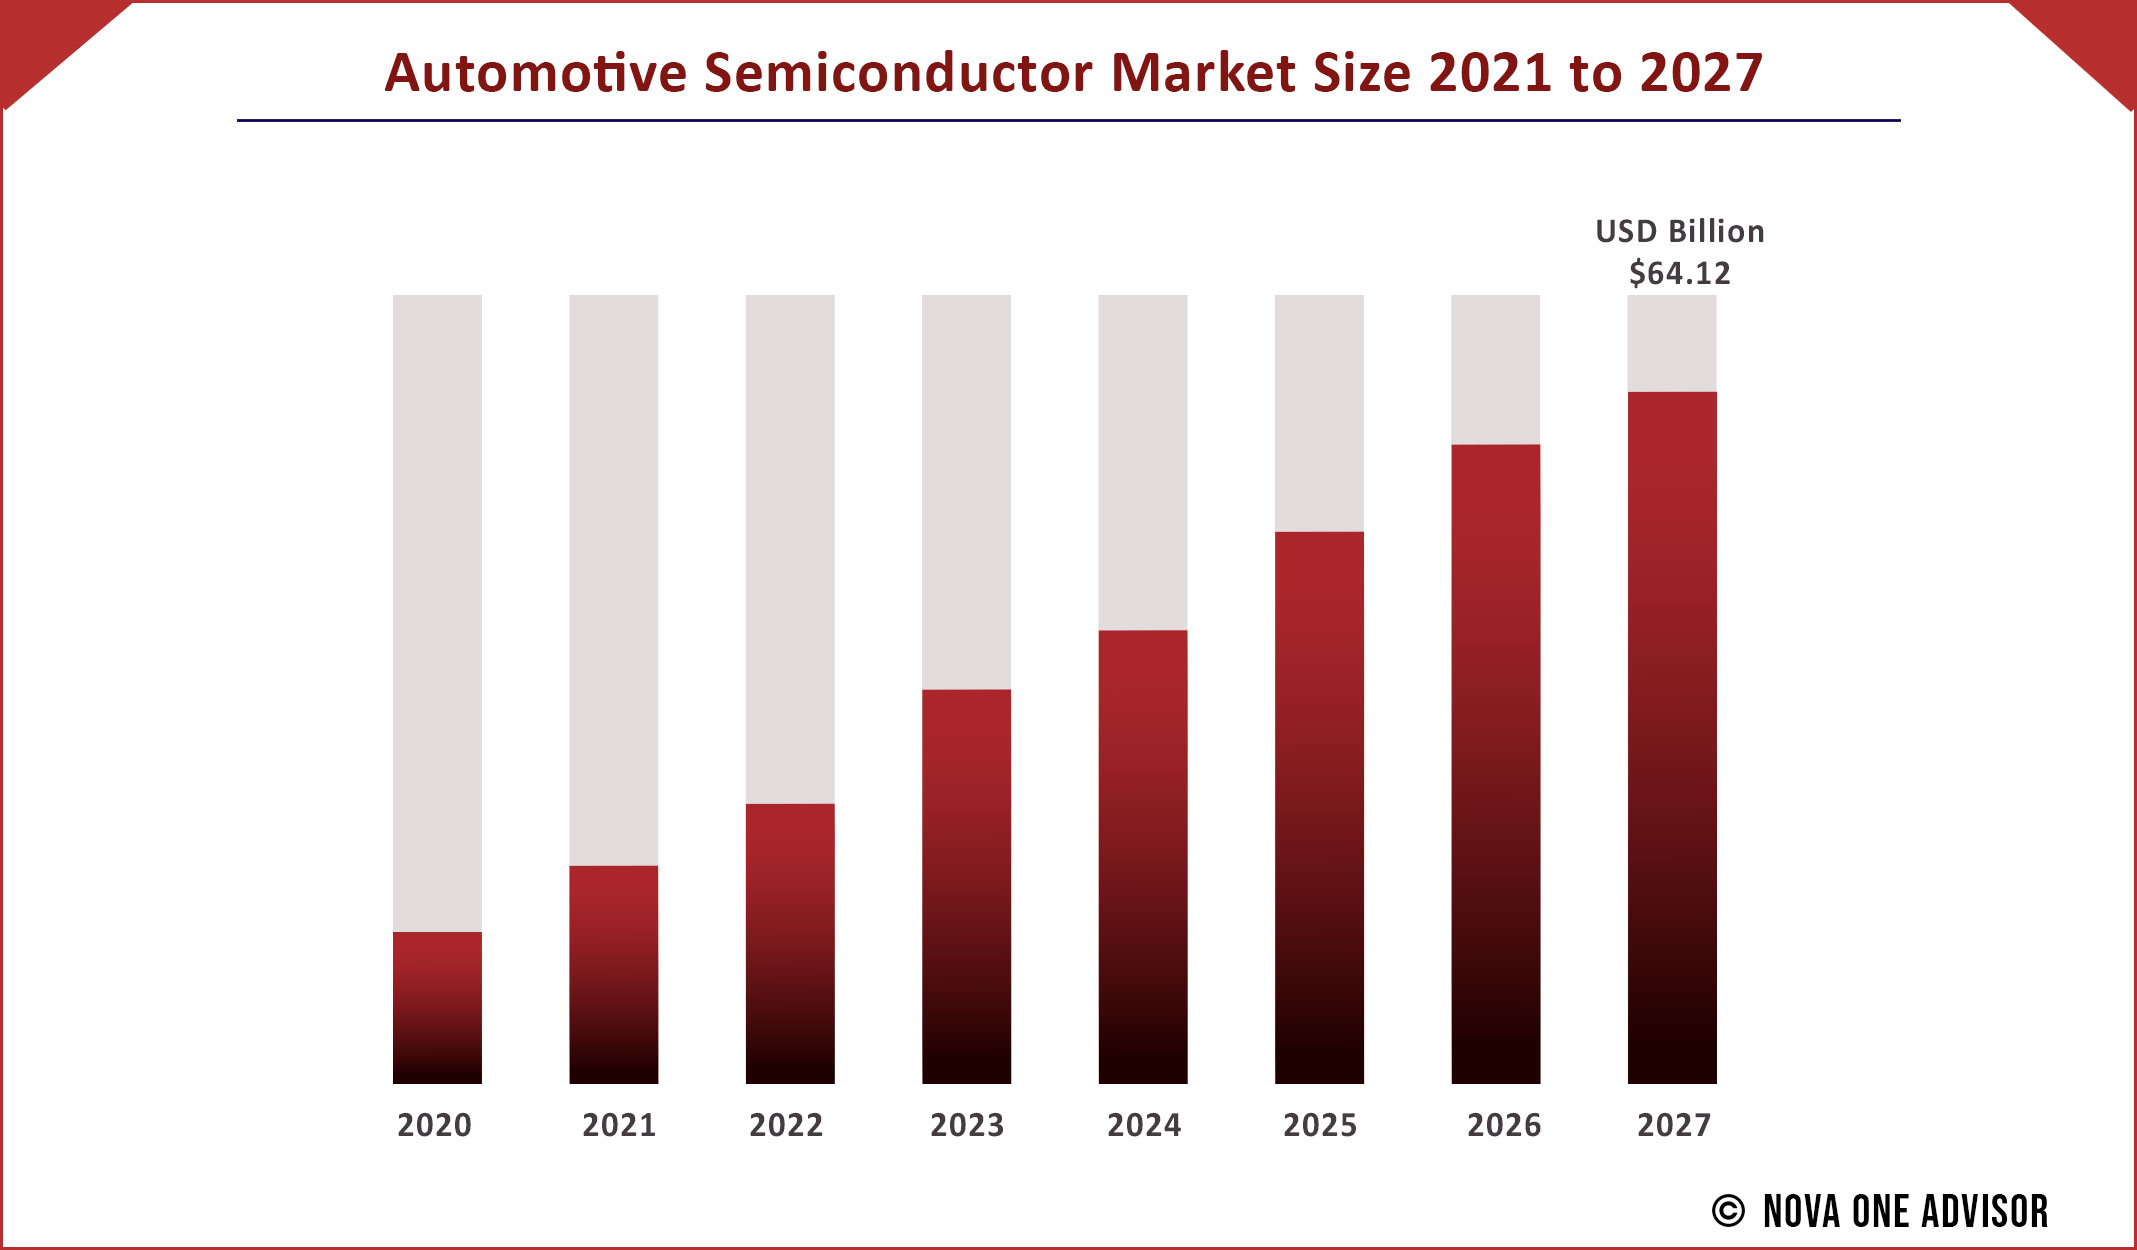 Automotive Semiconductor Market Size 2021 to 2027